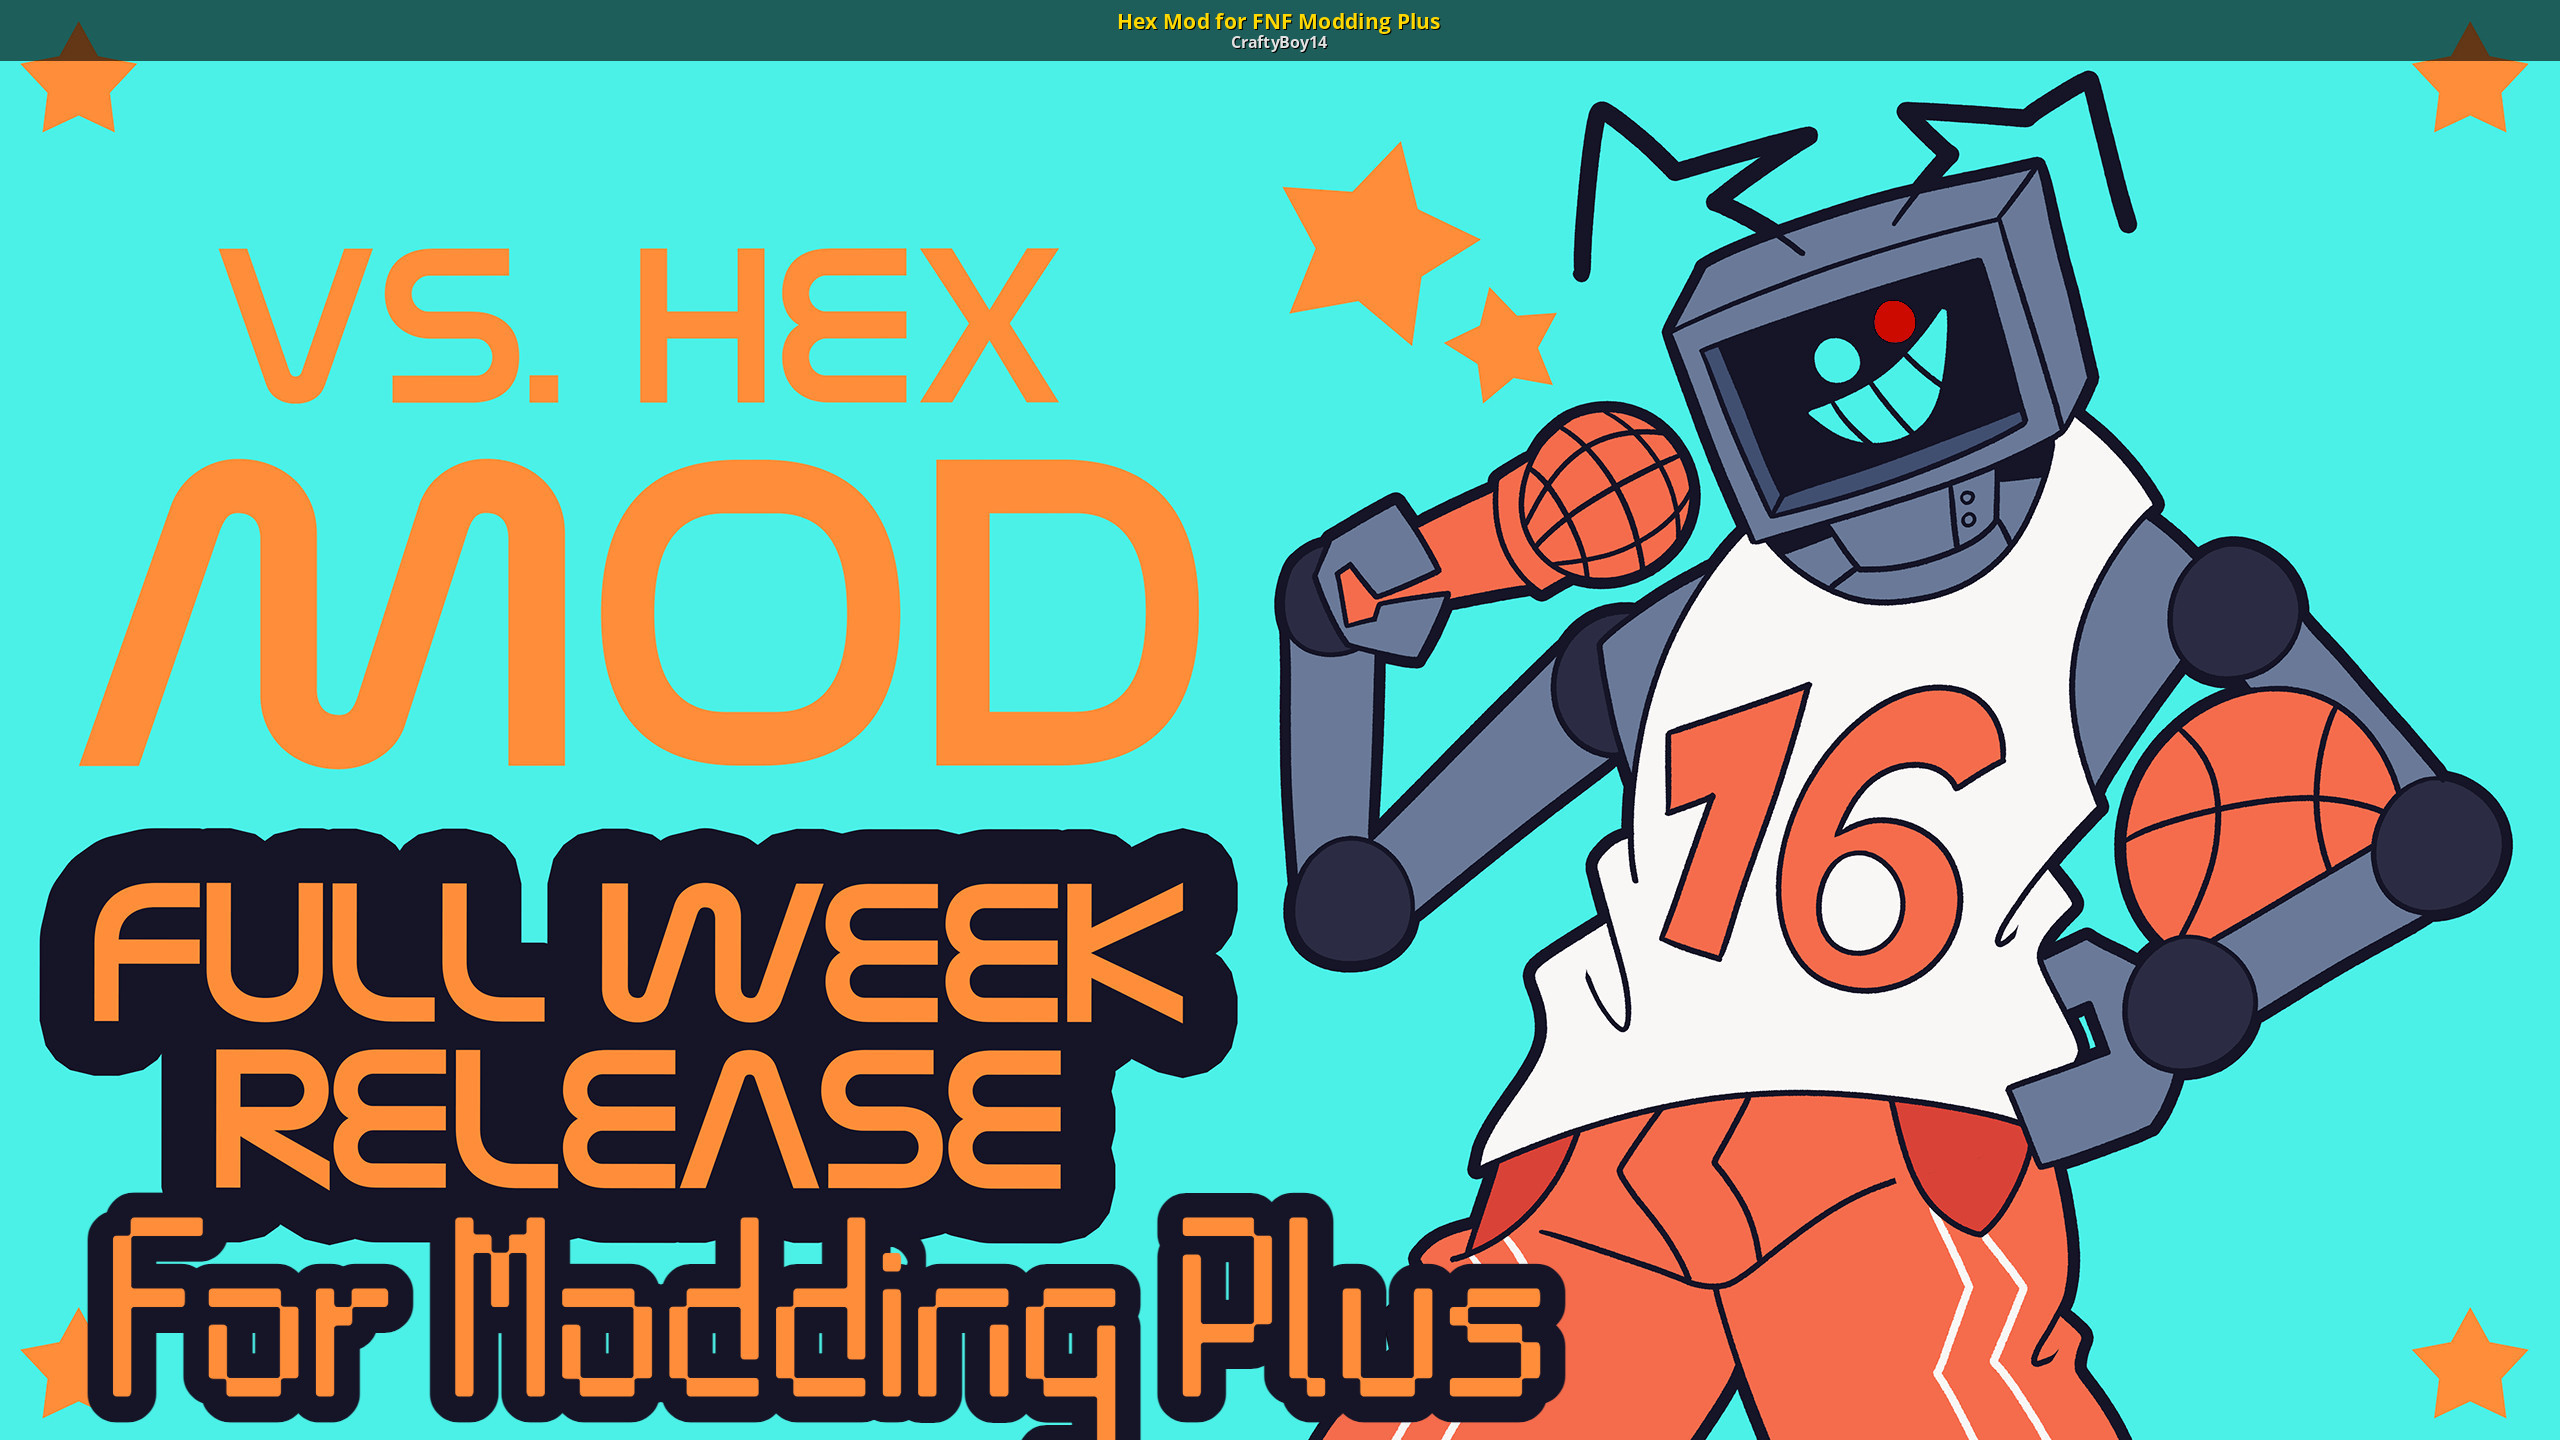 Hex Mod for FNF Modding Plus [Friday Night Funkin'] [Mods]